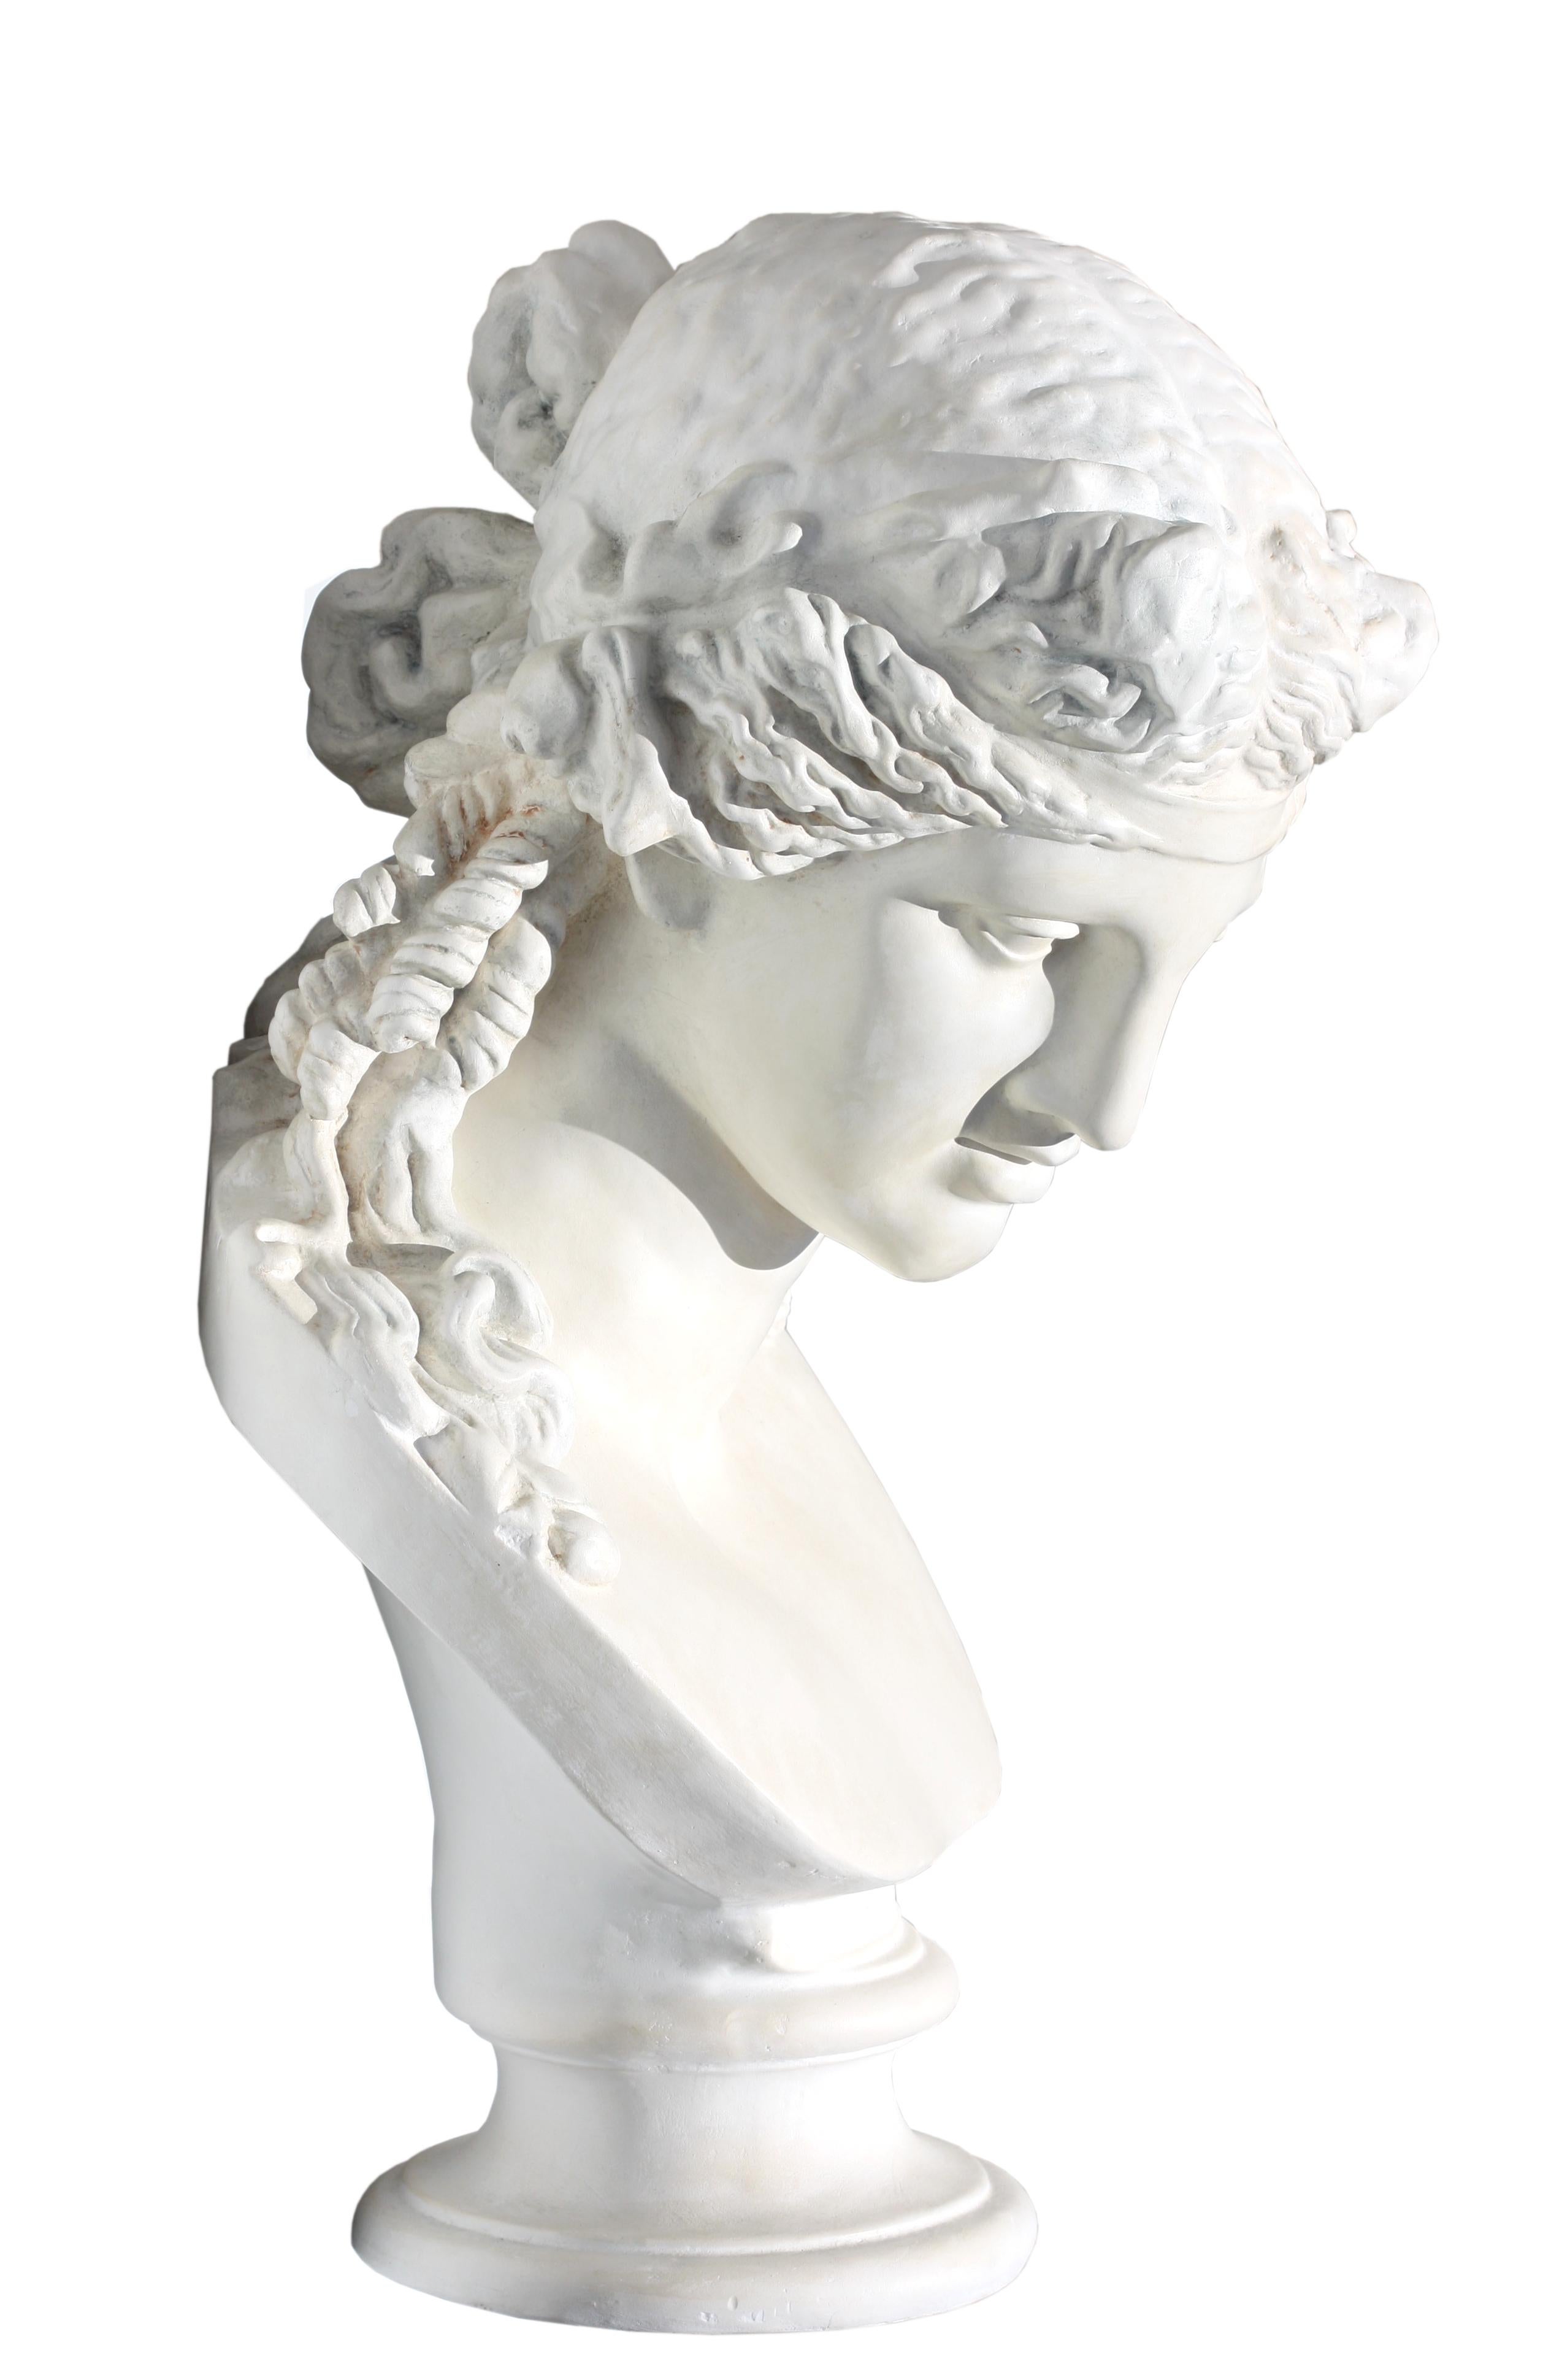 
Large Pair of Faux Marble Busts of Apollo and Diana 
After the Antique, the plaster busts on a circular base.
Height 30 in. (76.2 cm.), Width 25 in. (63.5 cm.)